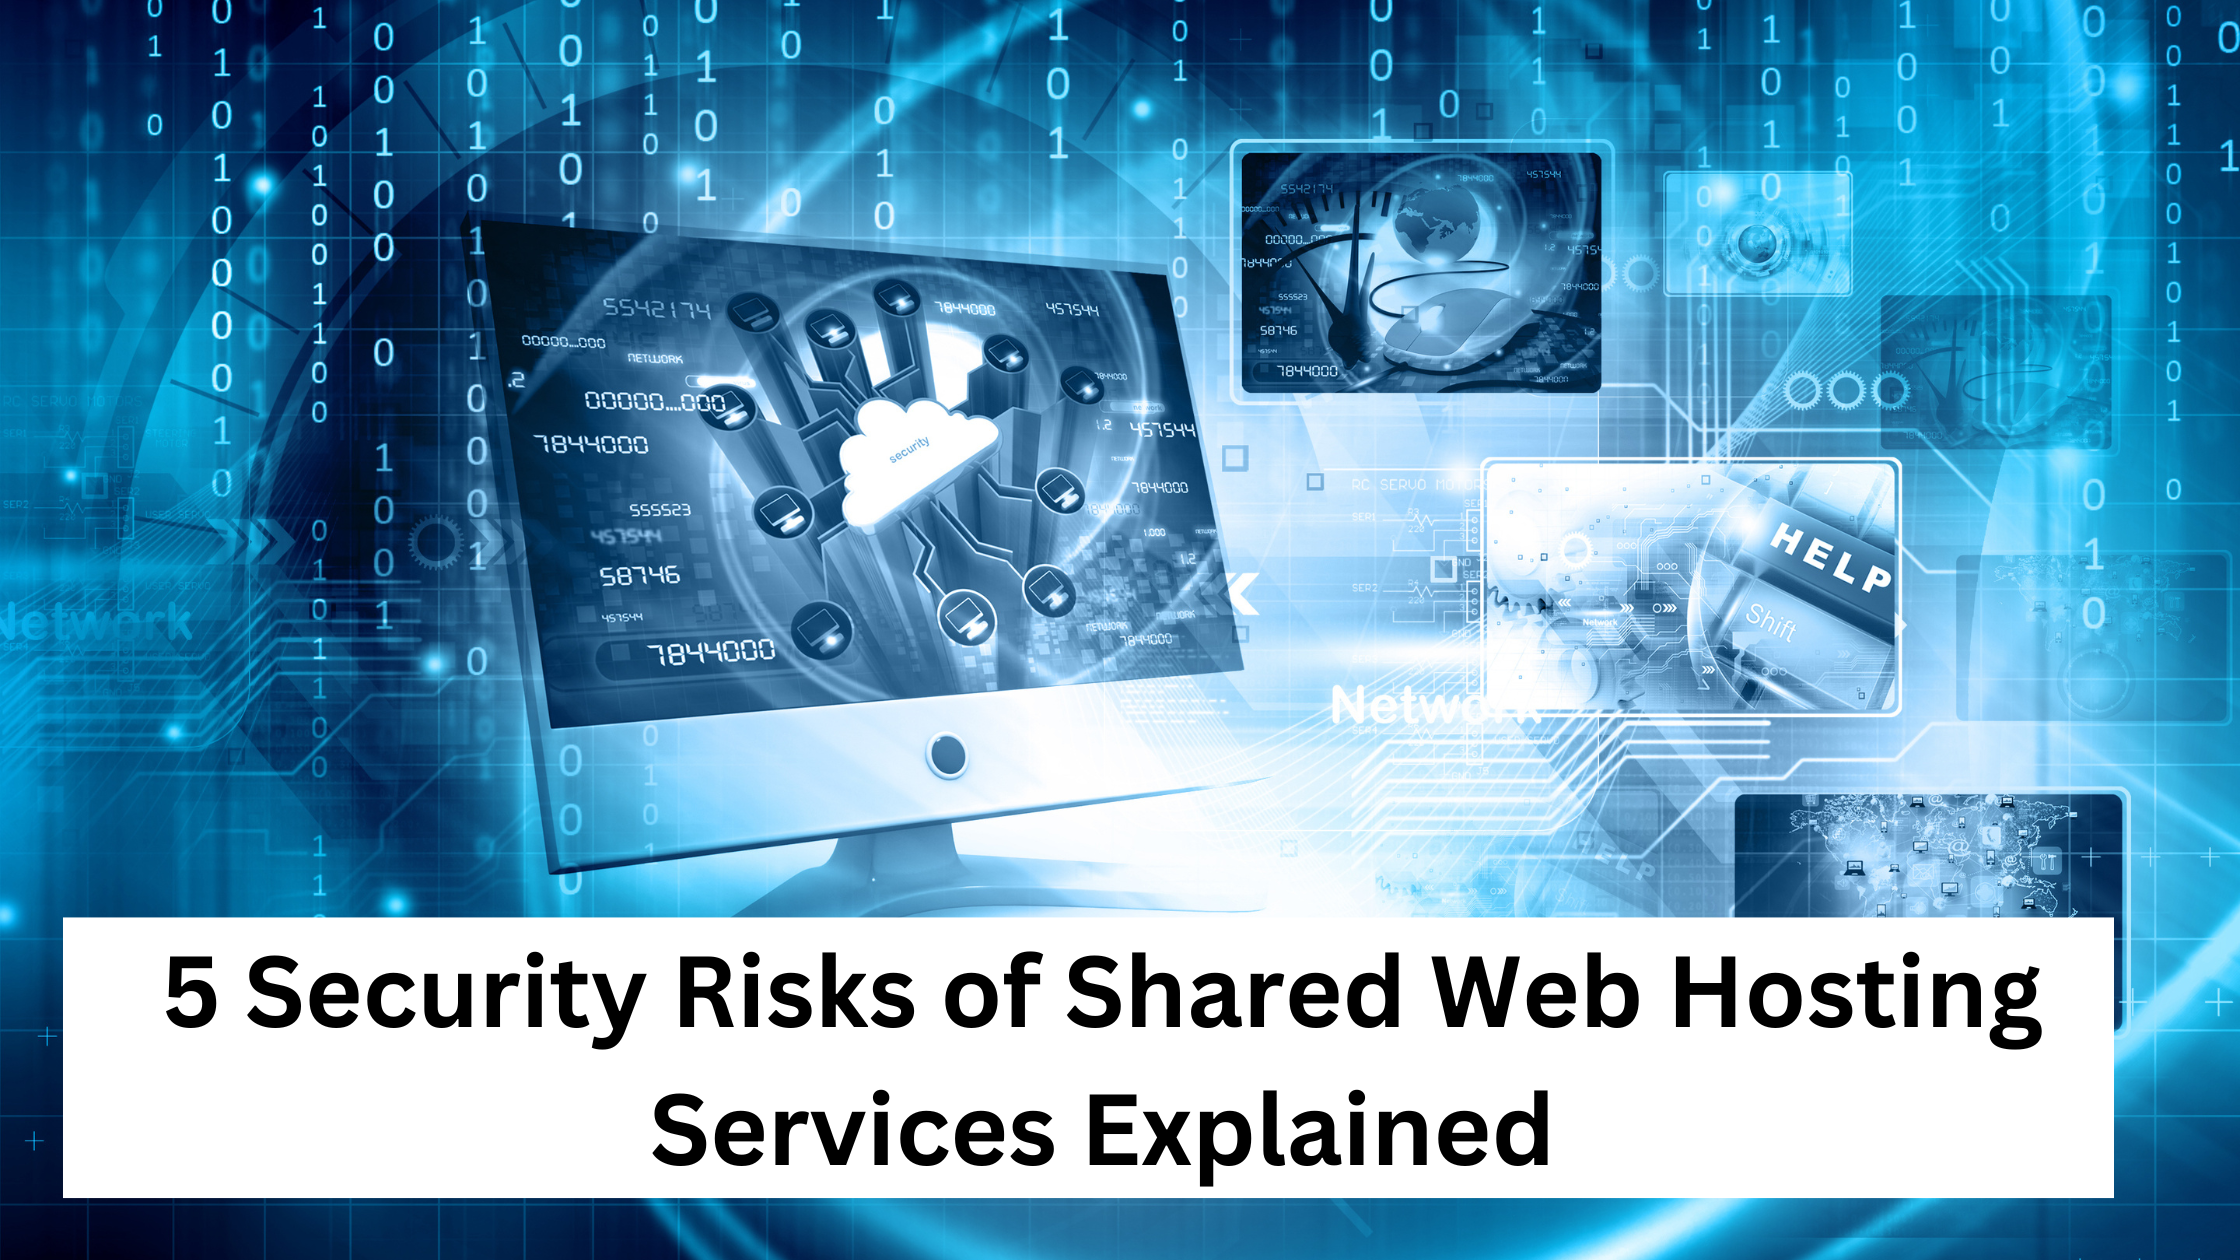 5 Security Risks of Shared Web Hosting Services Explained